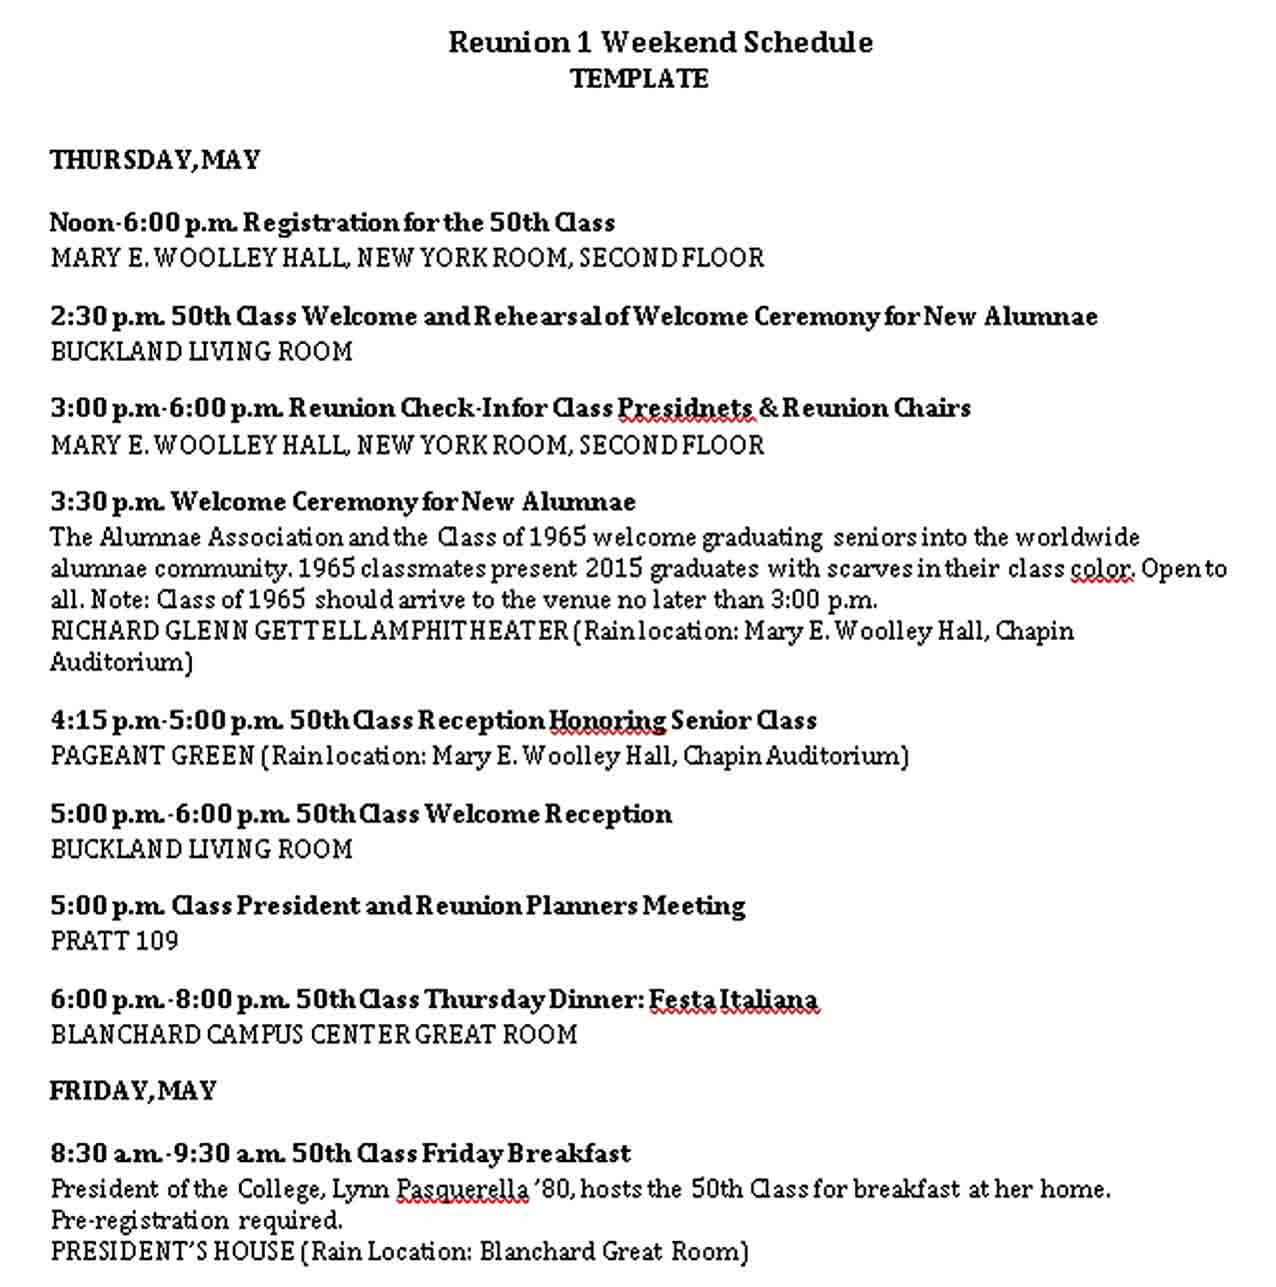 Free Download Reunion Weekend Schedule Template PDF